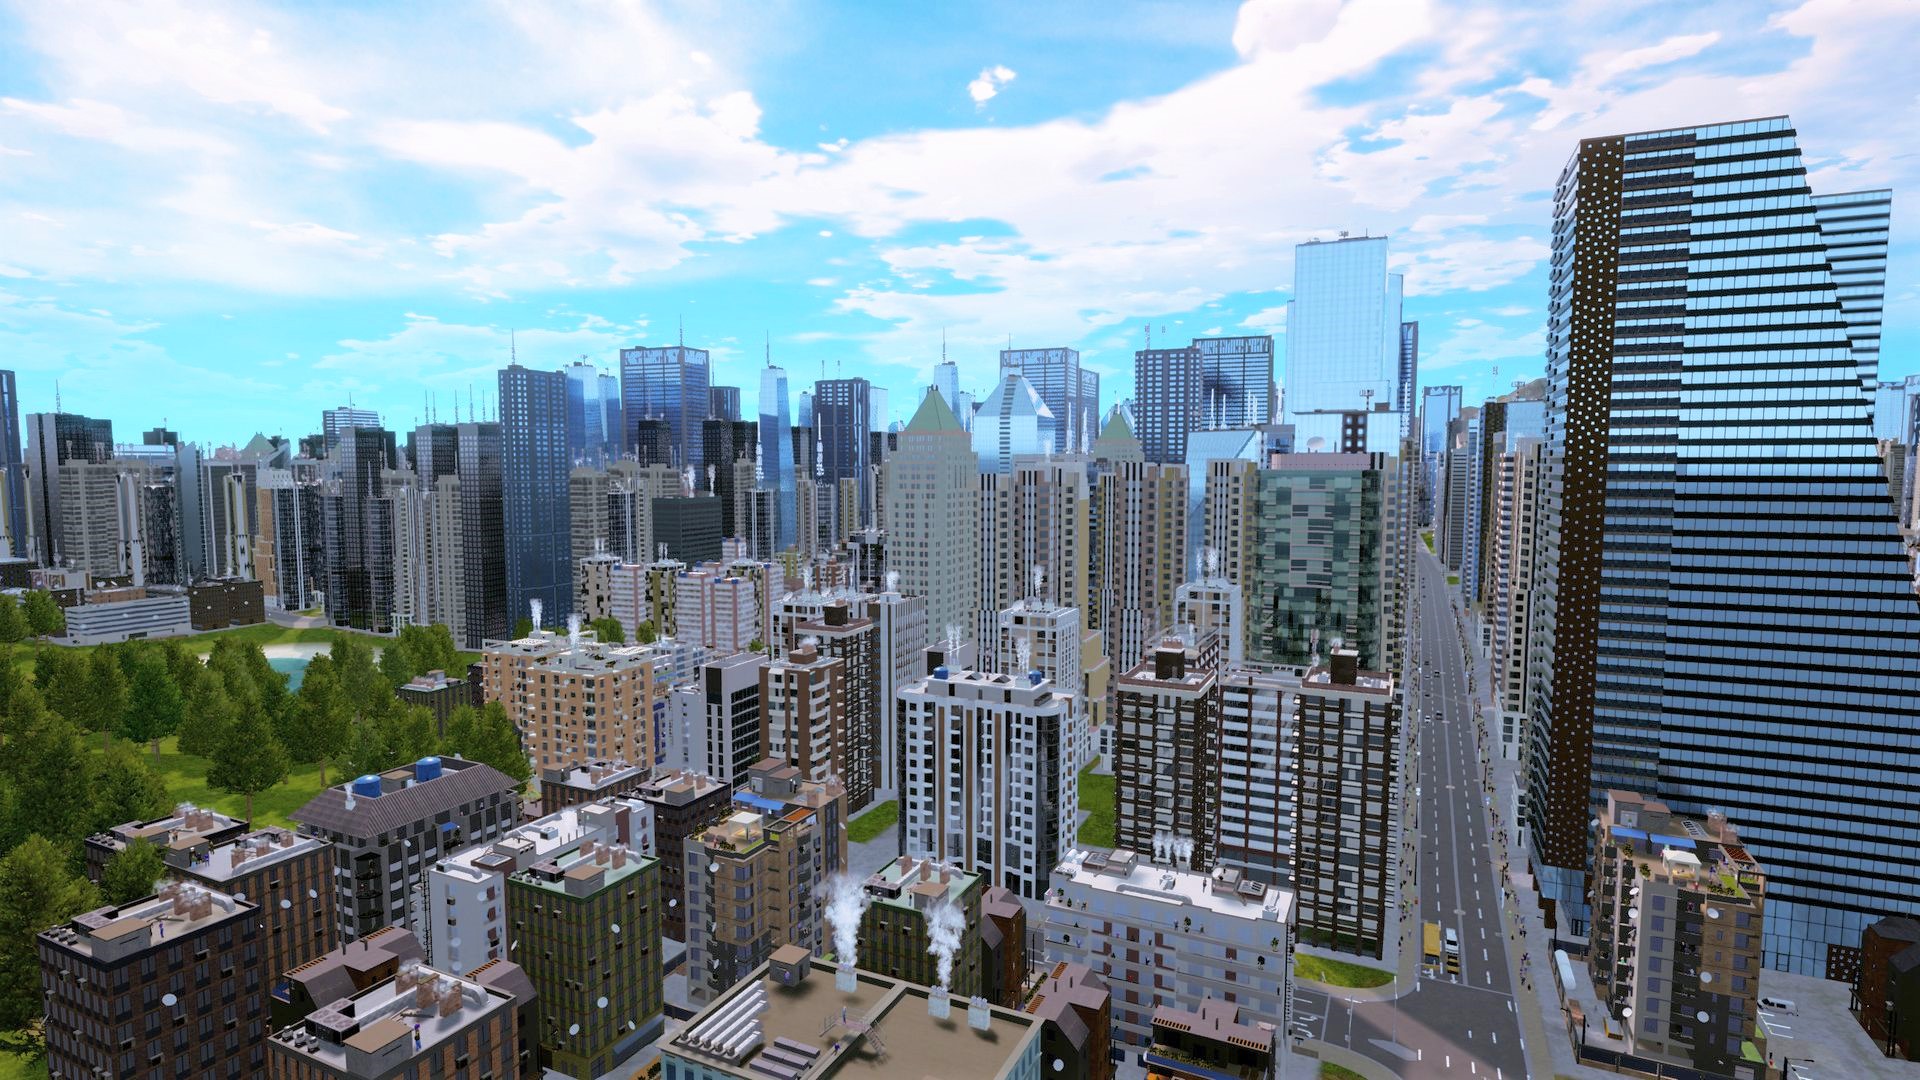 Here's a handy fan roundup of 30 city builders coming up